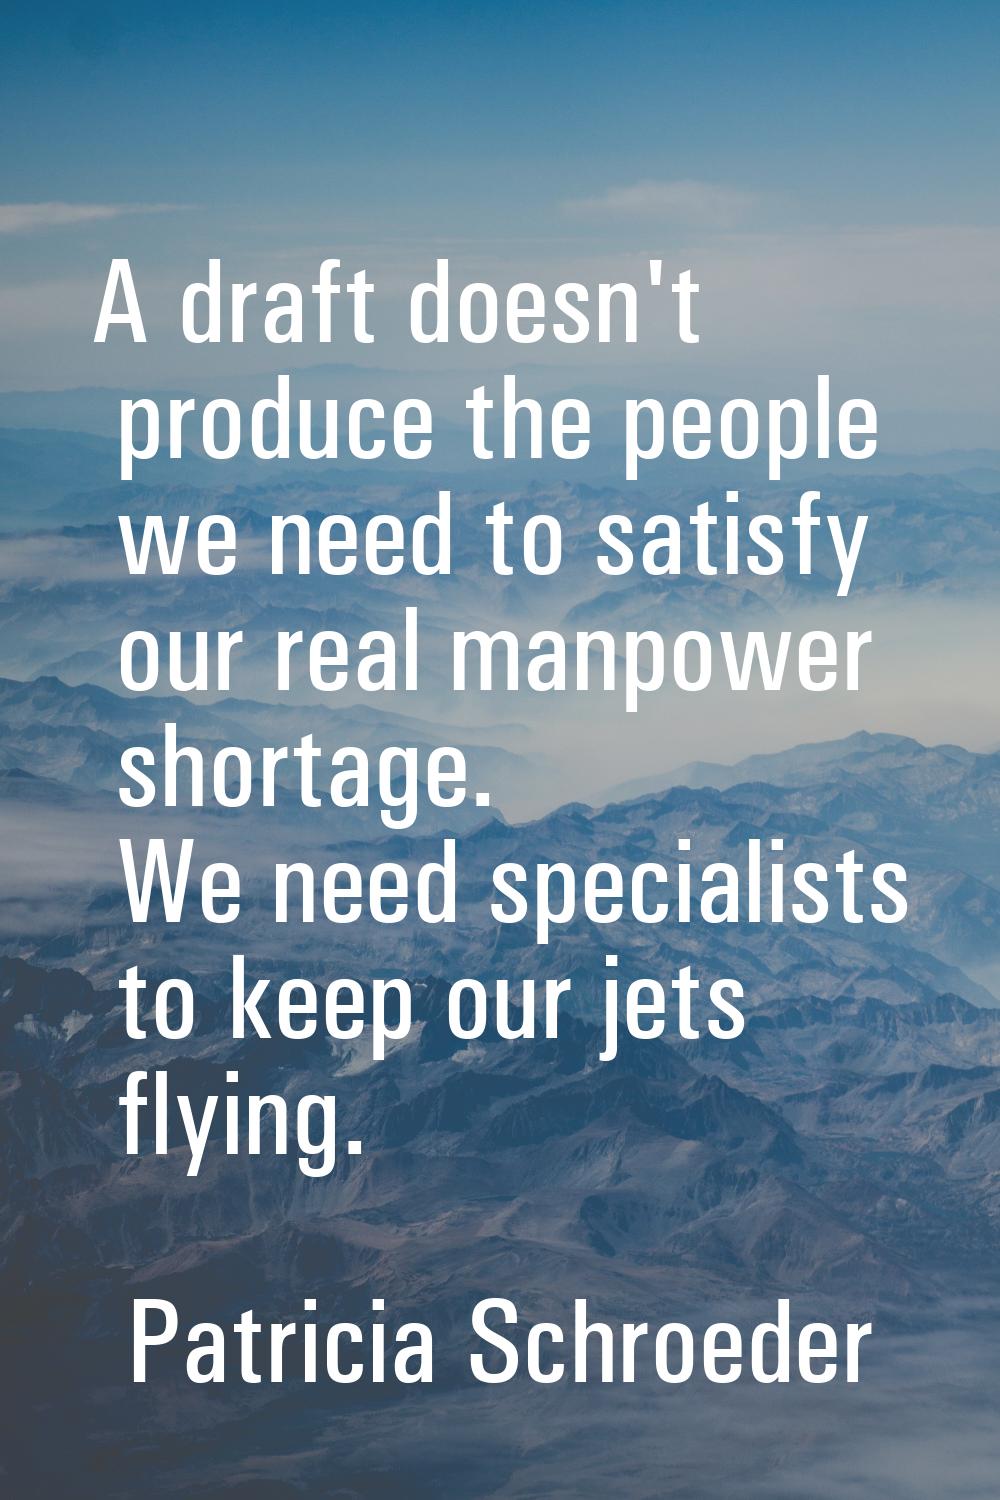 A draft doesn't produce the people we need to satisfy our real manpower shortage. We need specialis